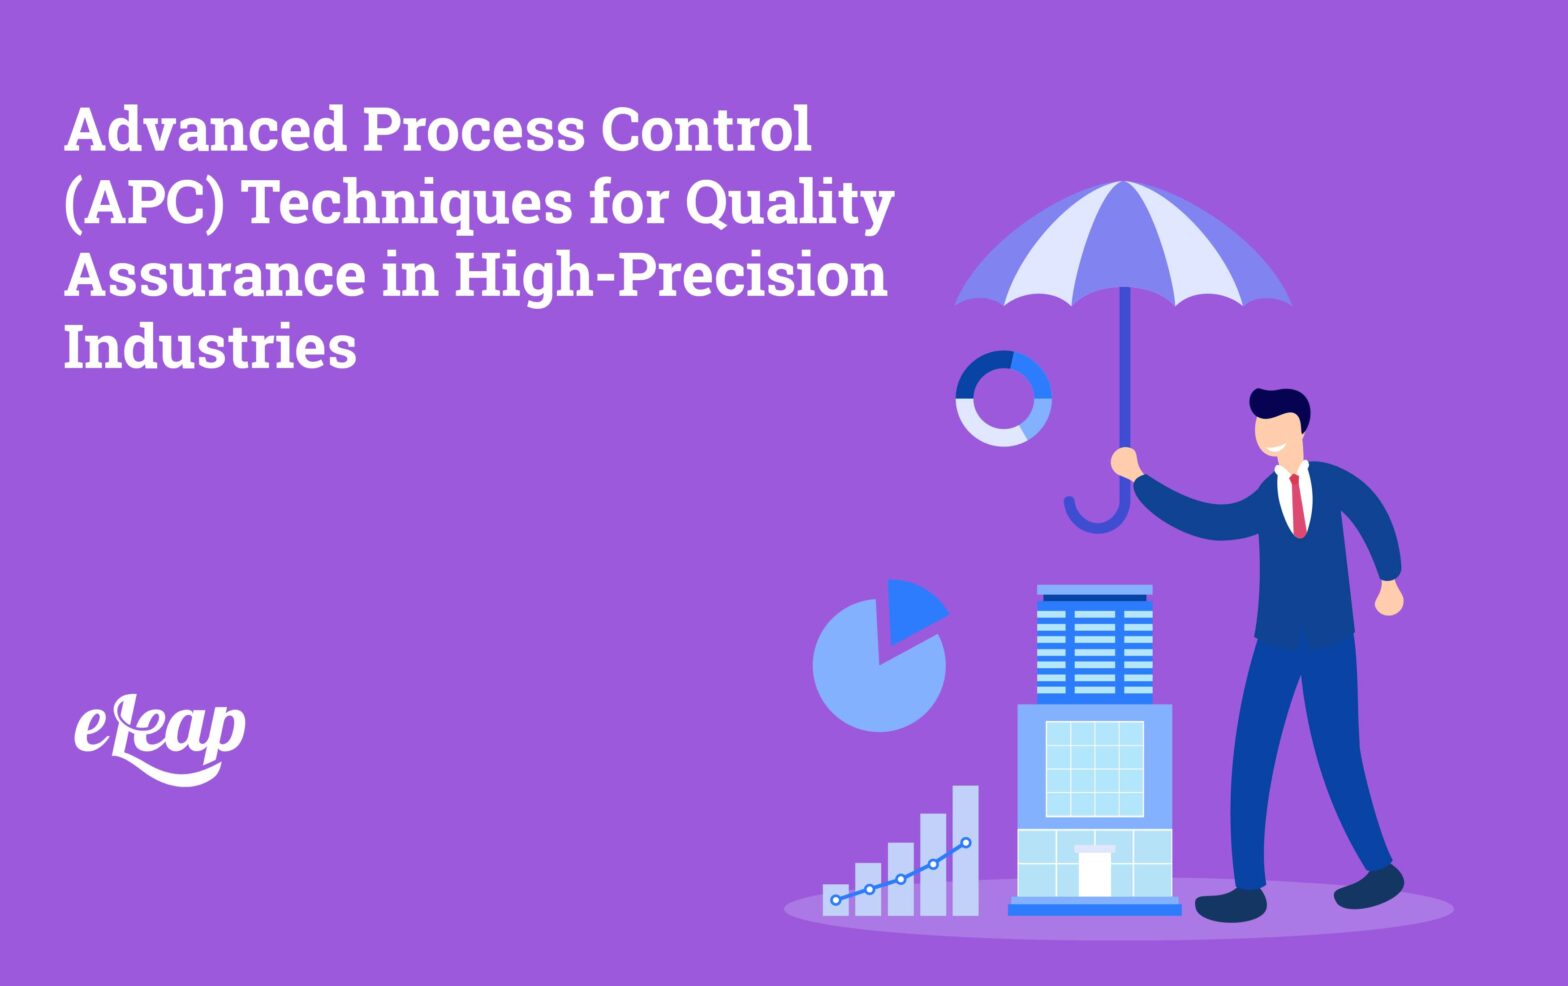 Advanced Process Control (APC) Techniques for Quality Assurance in High-Precision Industries